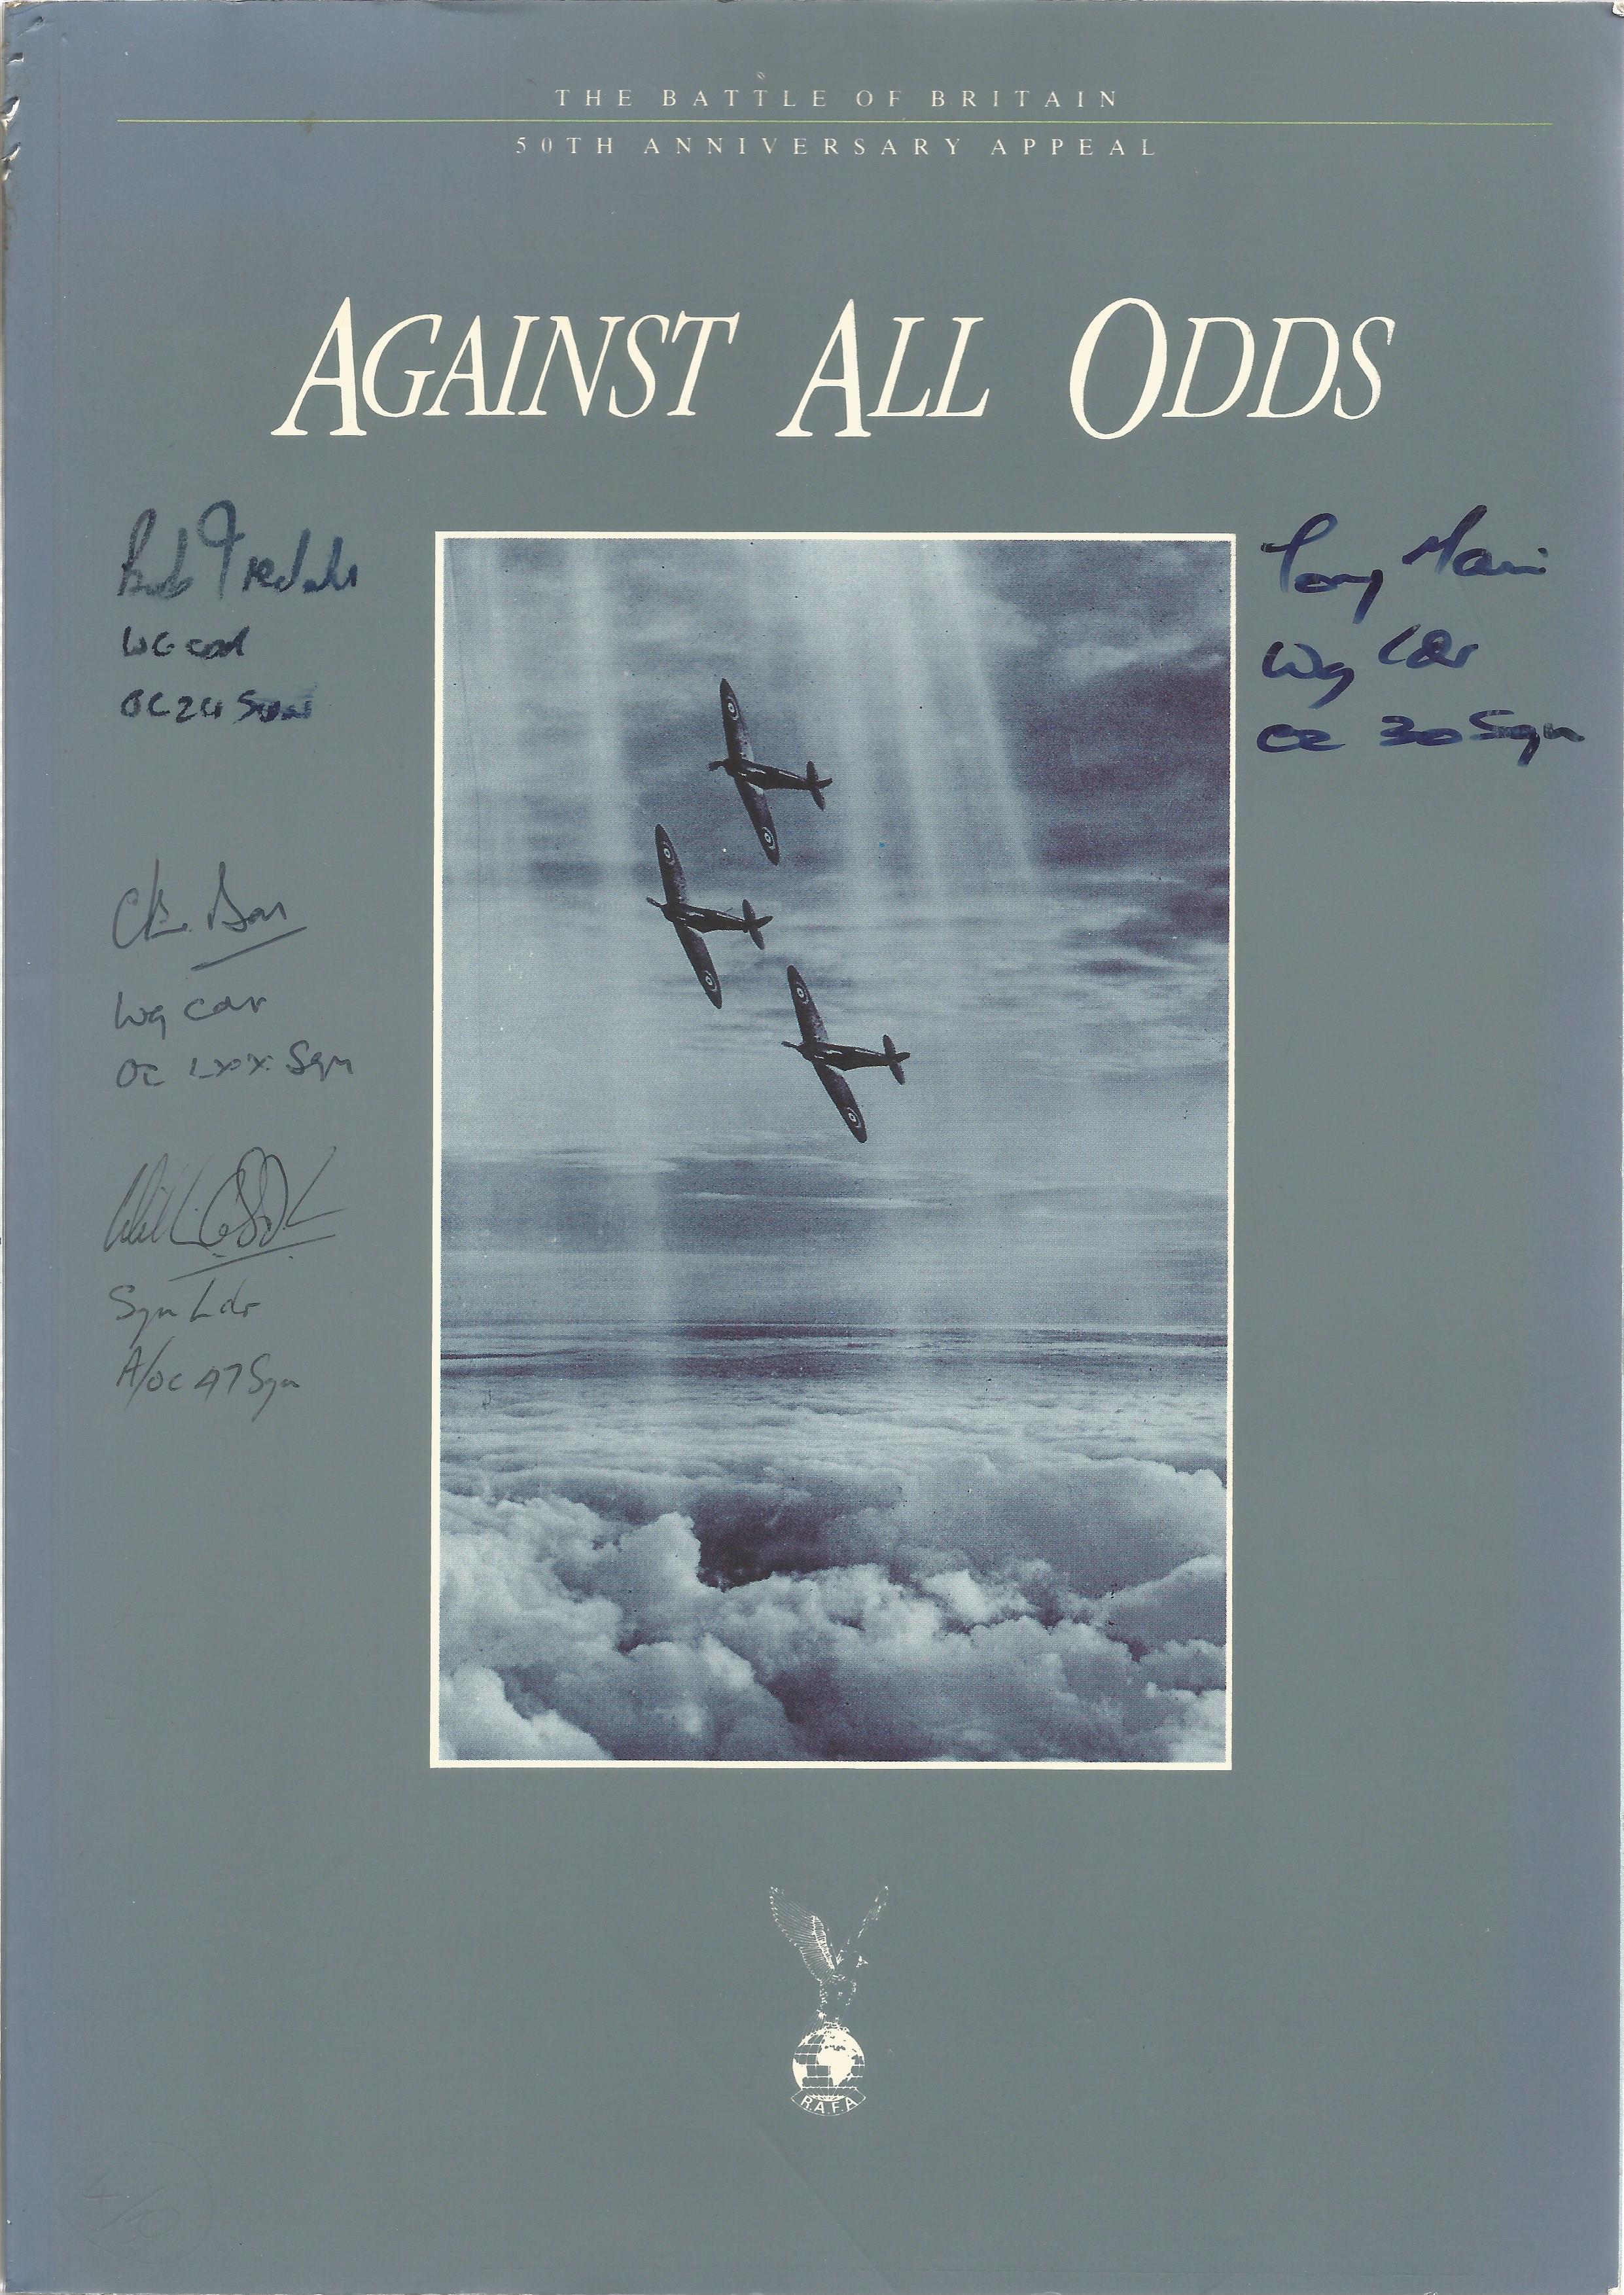 WW2. Multi signed Paperback book Titled 'Against All Odds'. Signed on Front Cover by 3 Wing